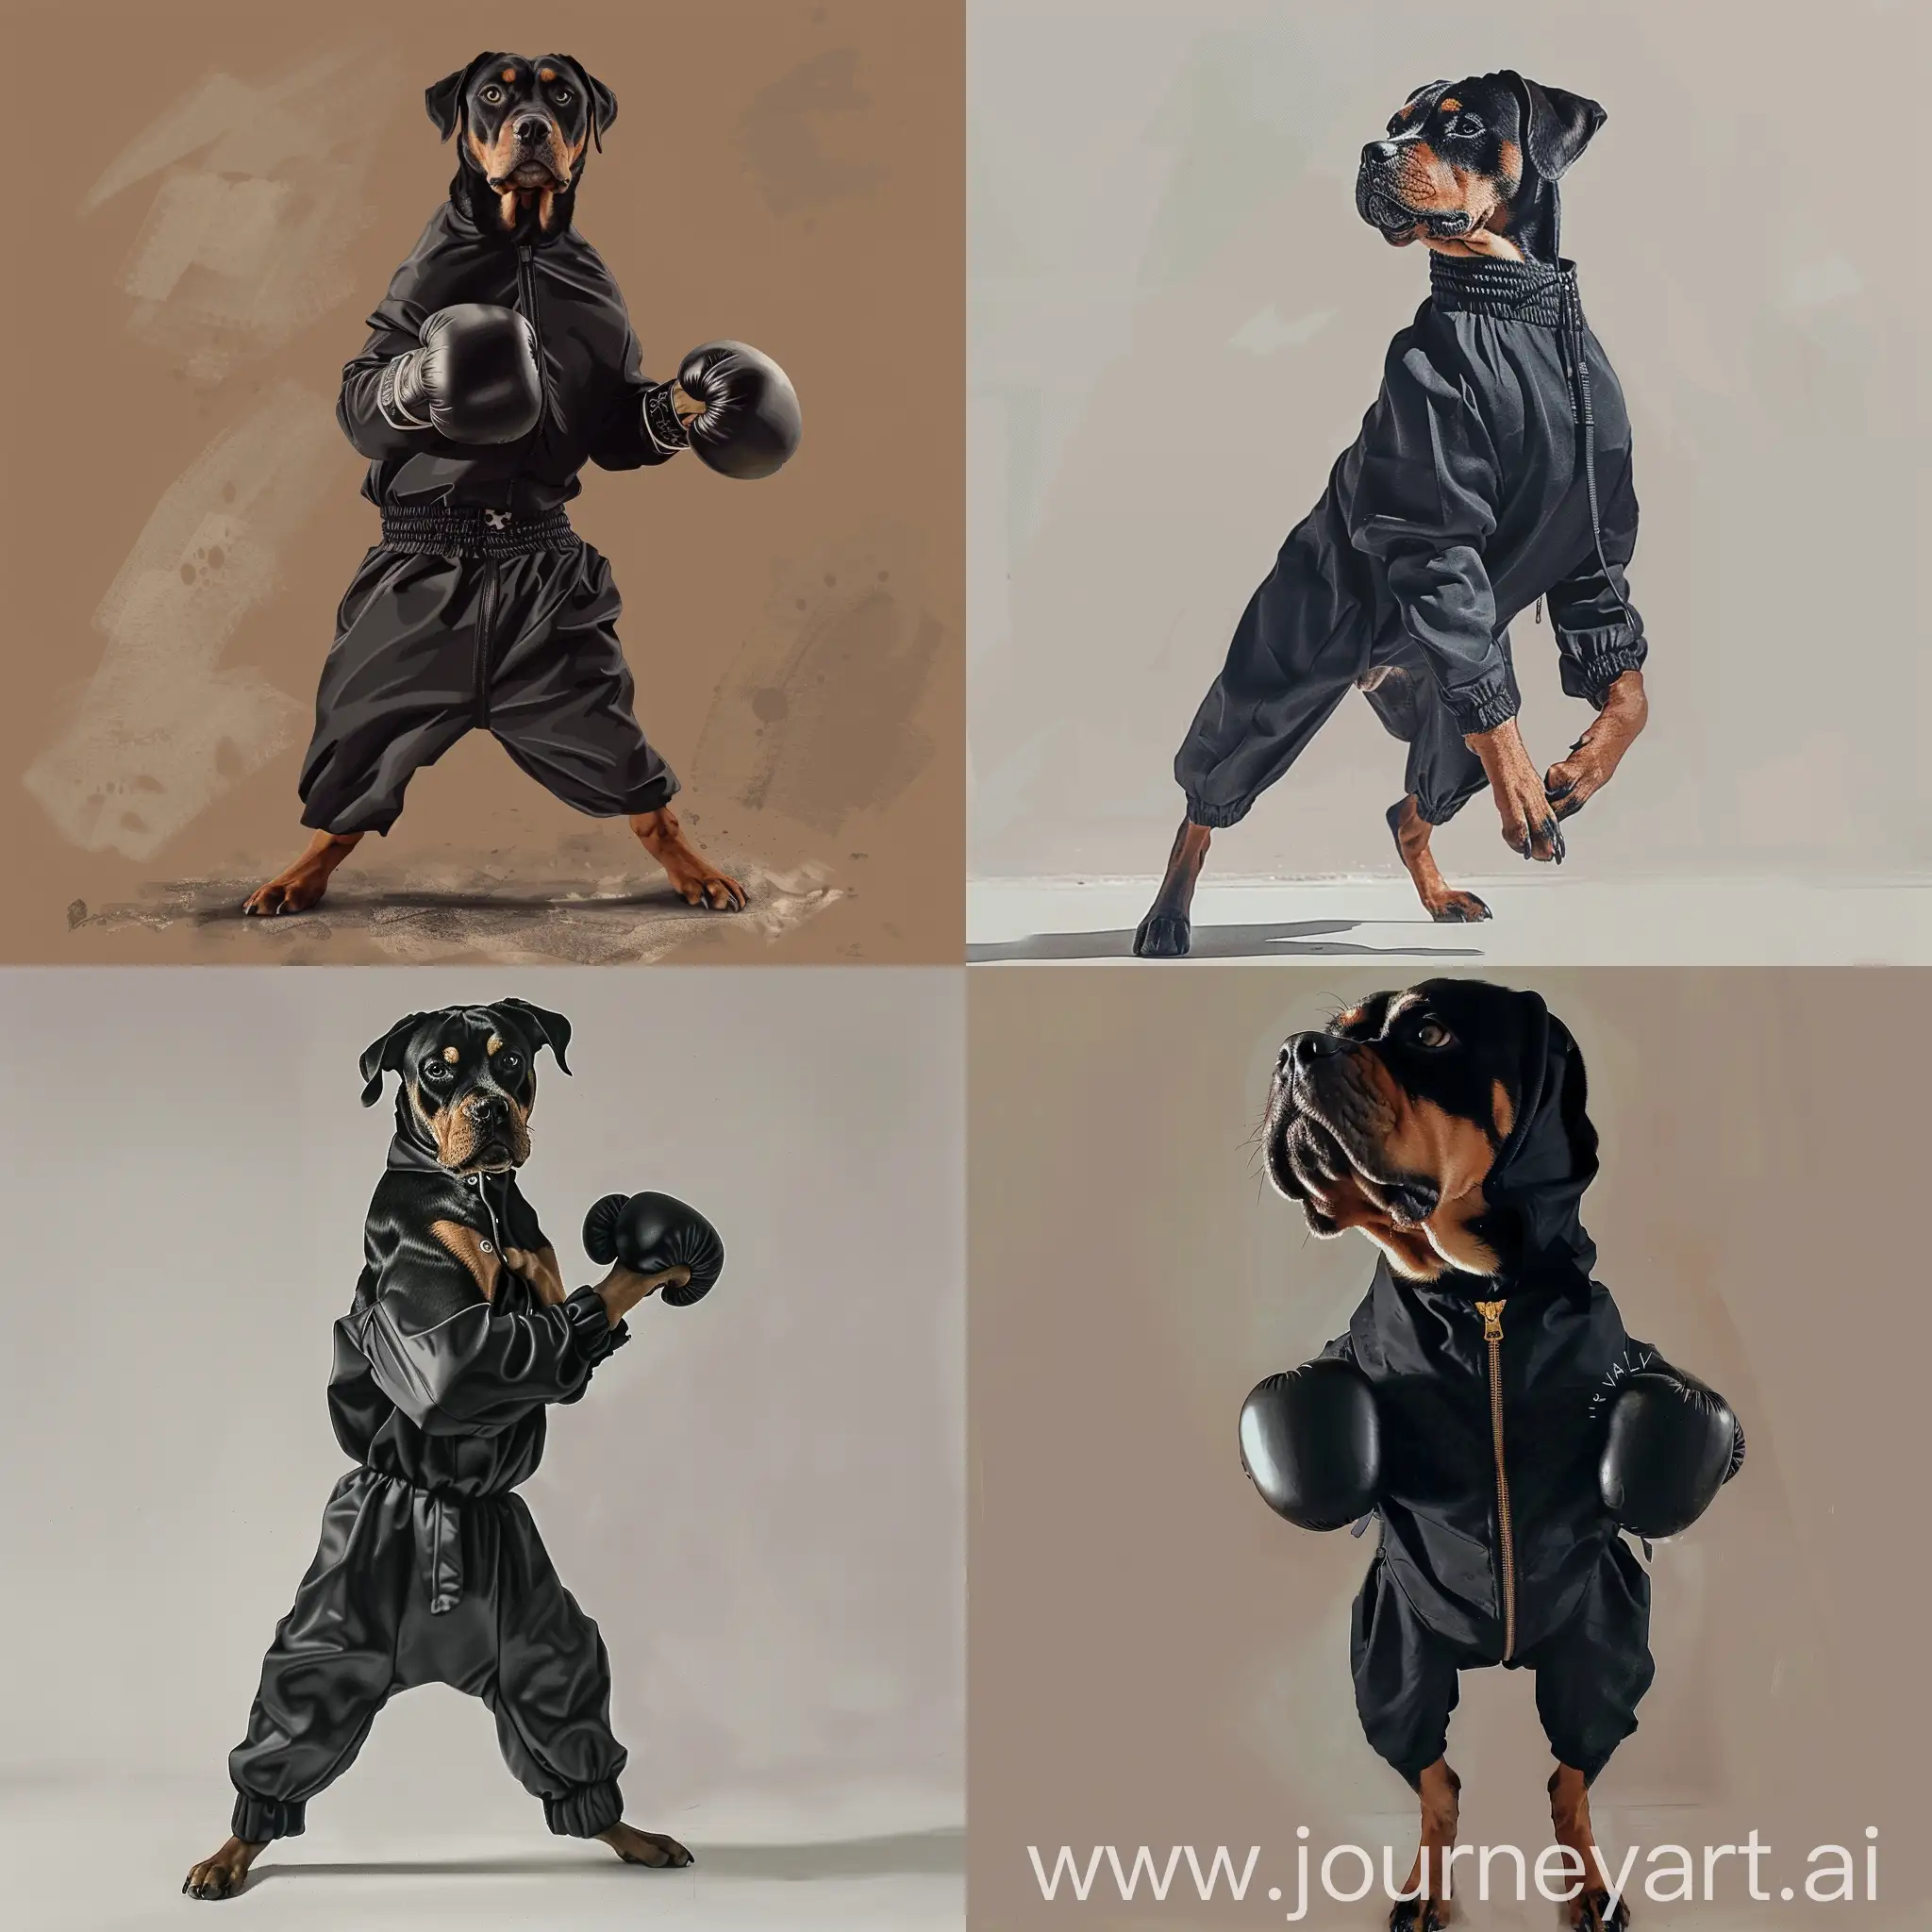 Draw a photo realistic image of a black and tan boxer dog dressed like a boxer standing on its back legs